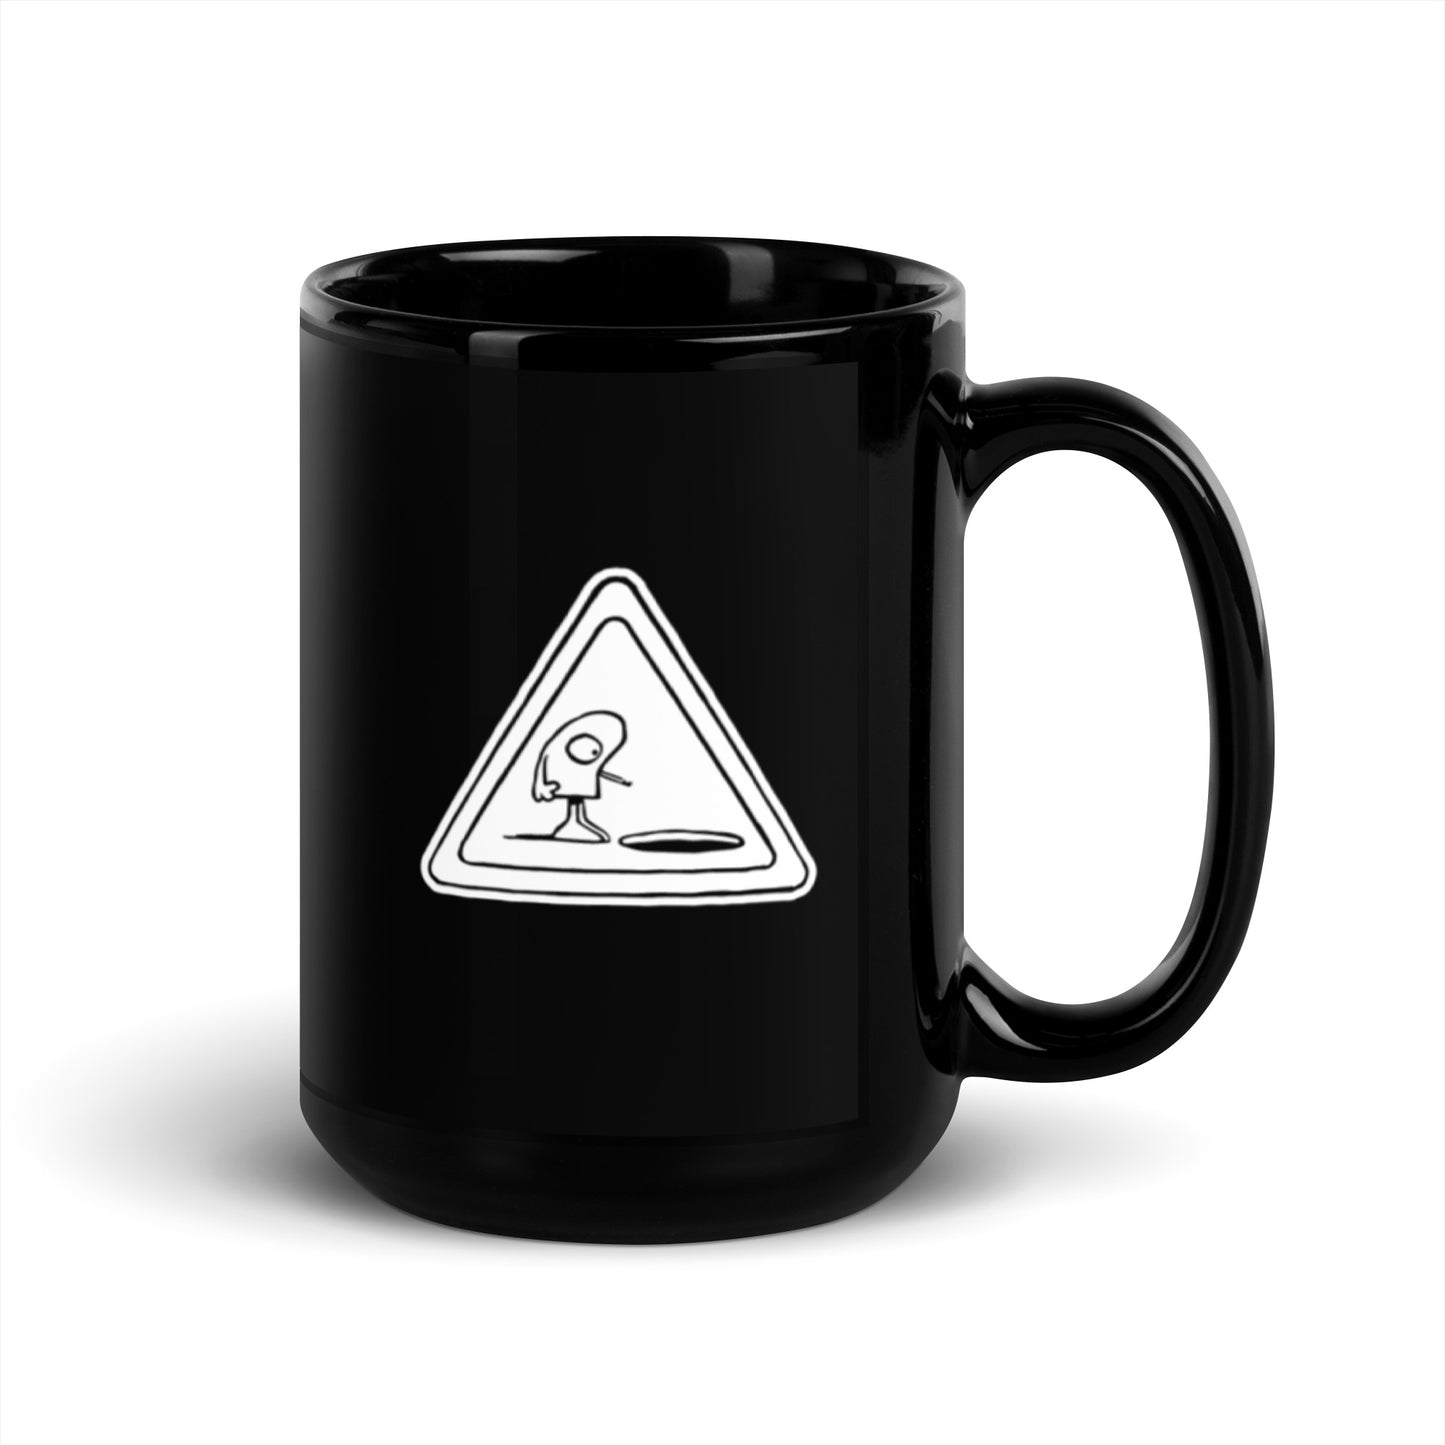 Poor Pleb Black Glossy Mug - Pleb at Work (available in the US only)